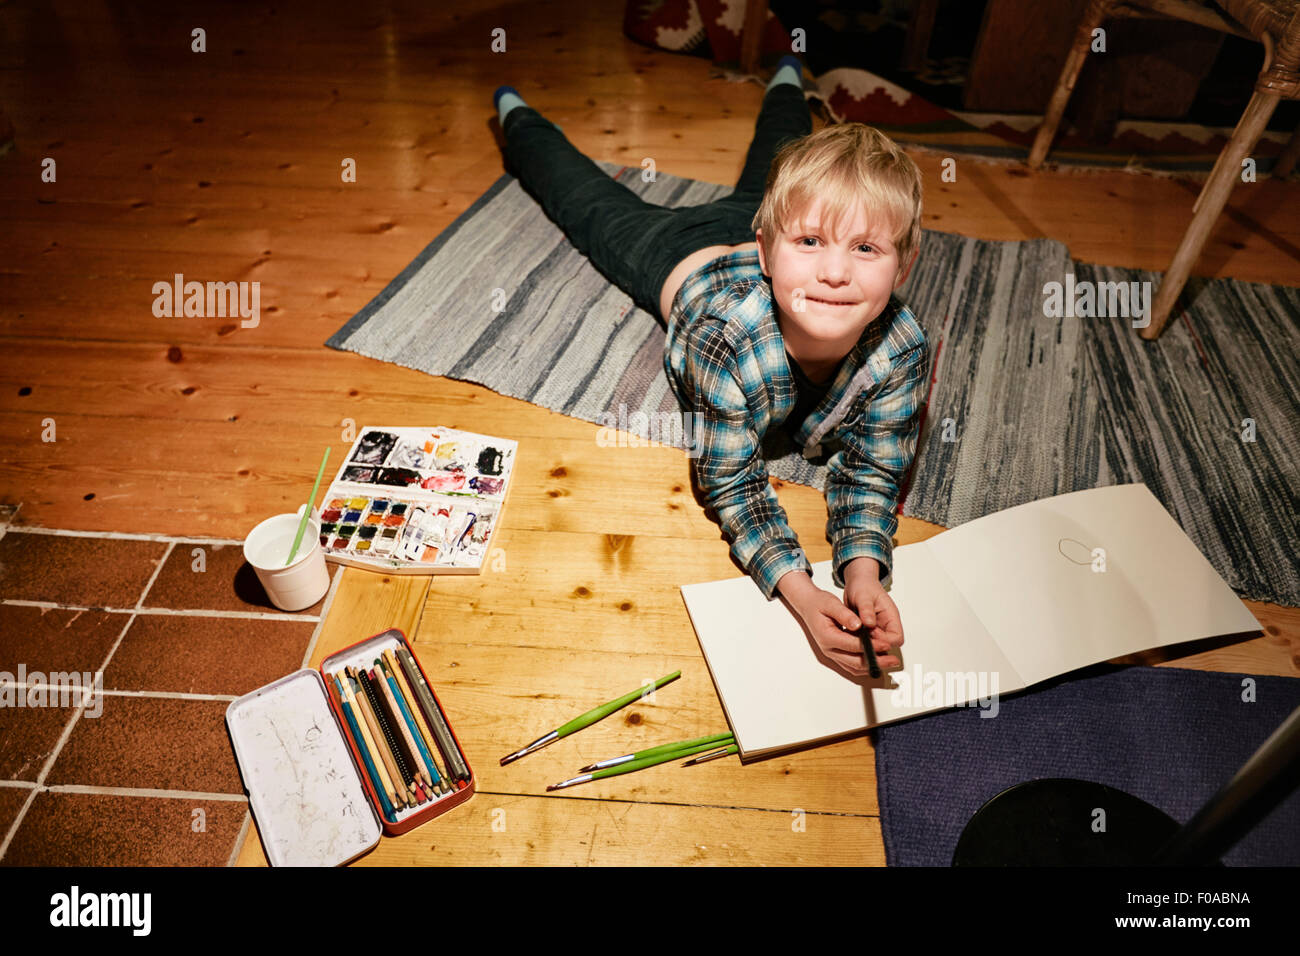 Boy lying on floor with watercolor paints and sketch pad Stock Photo